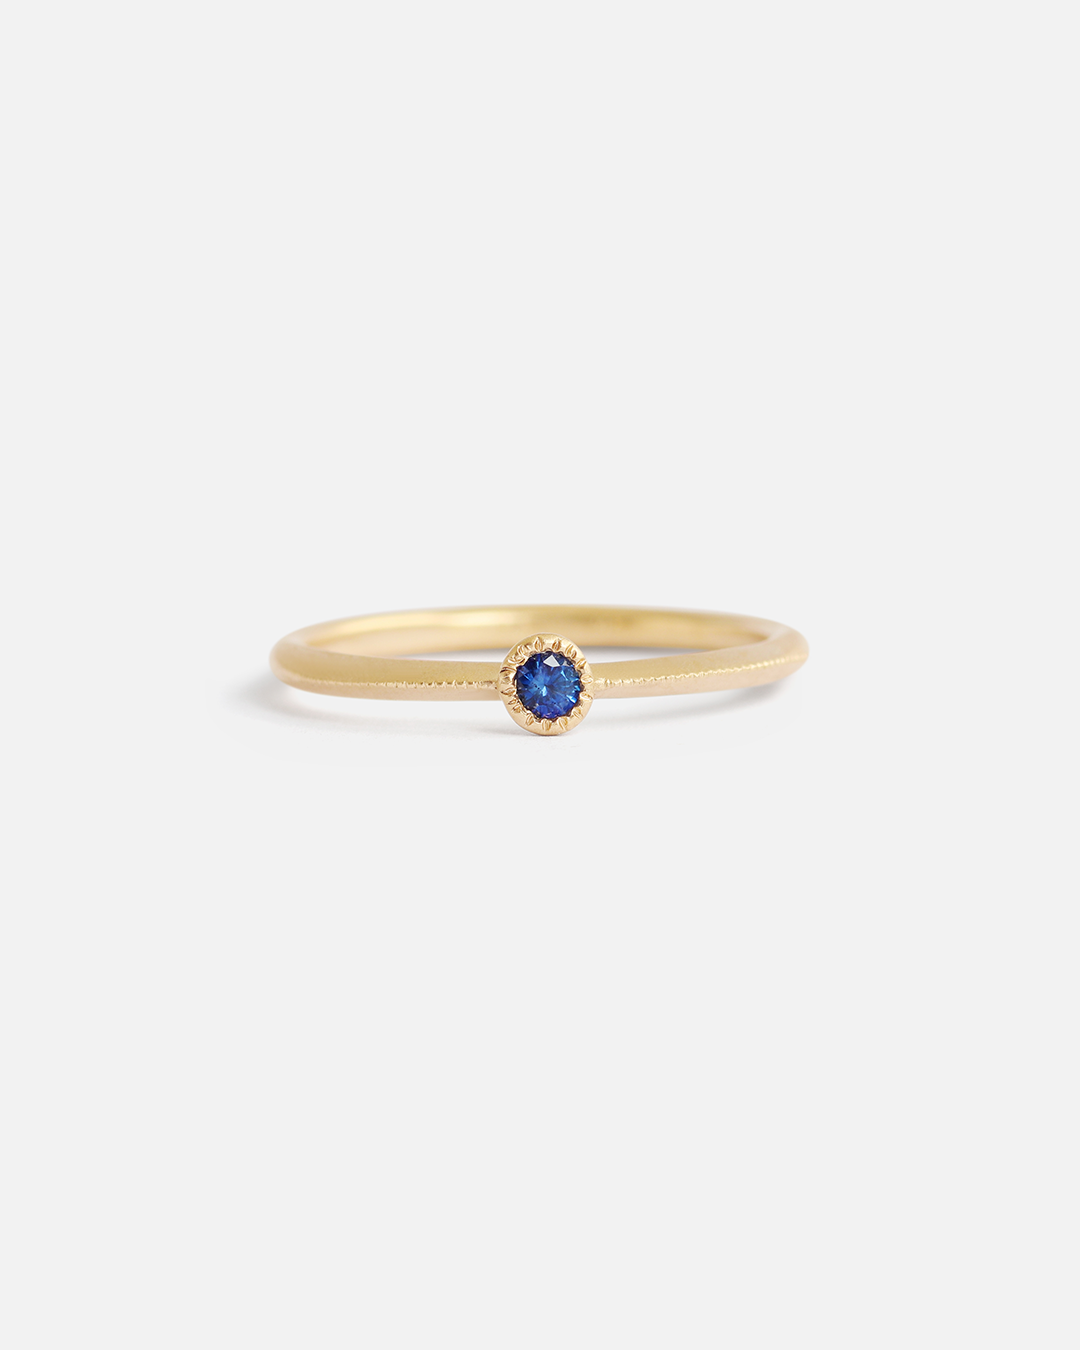 Melee Ball / Blue Sapphire Ring By Hiroyo